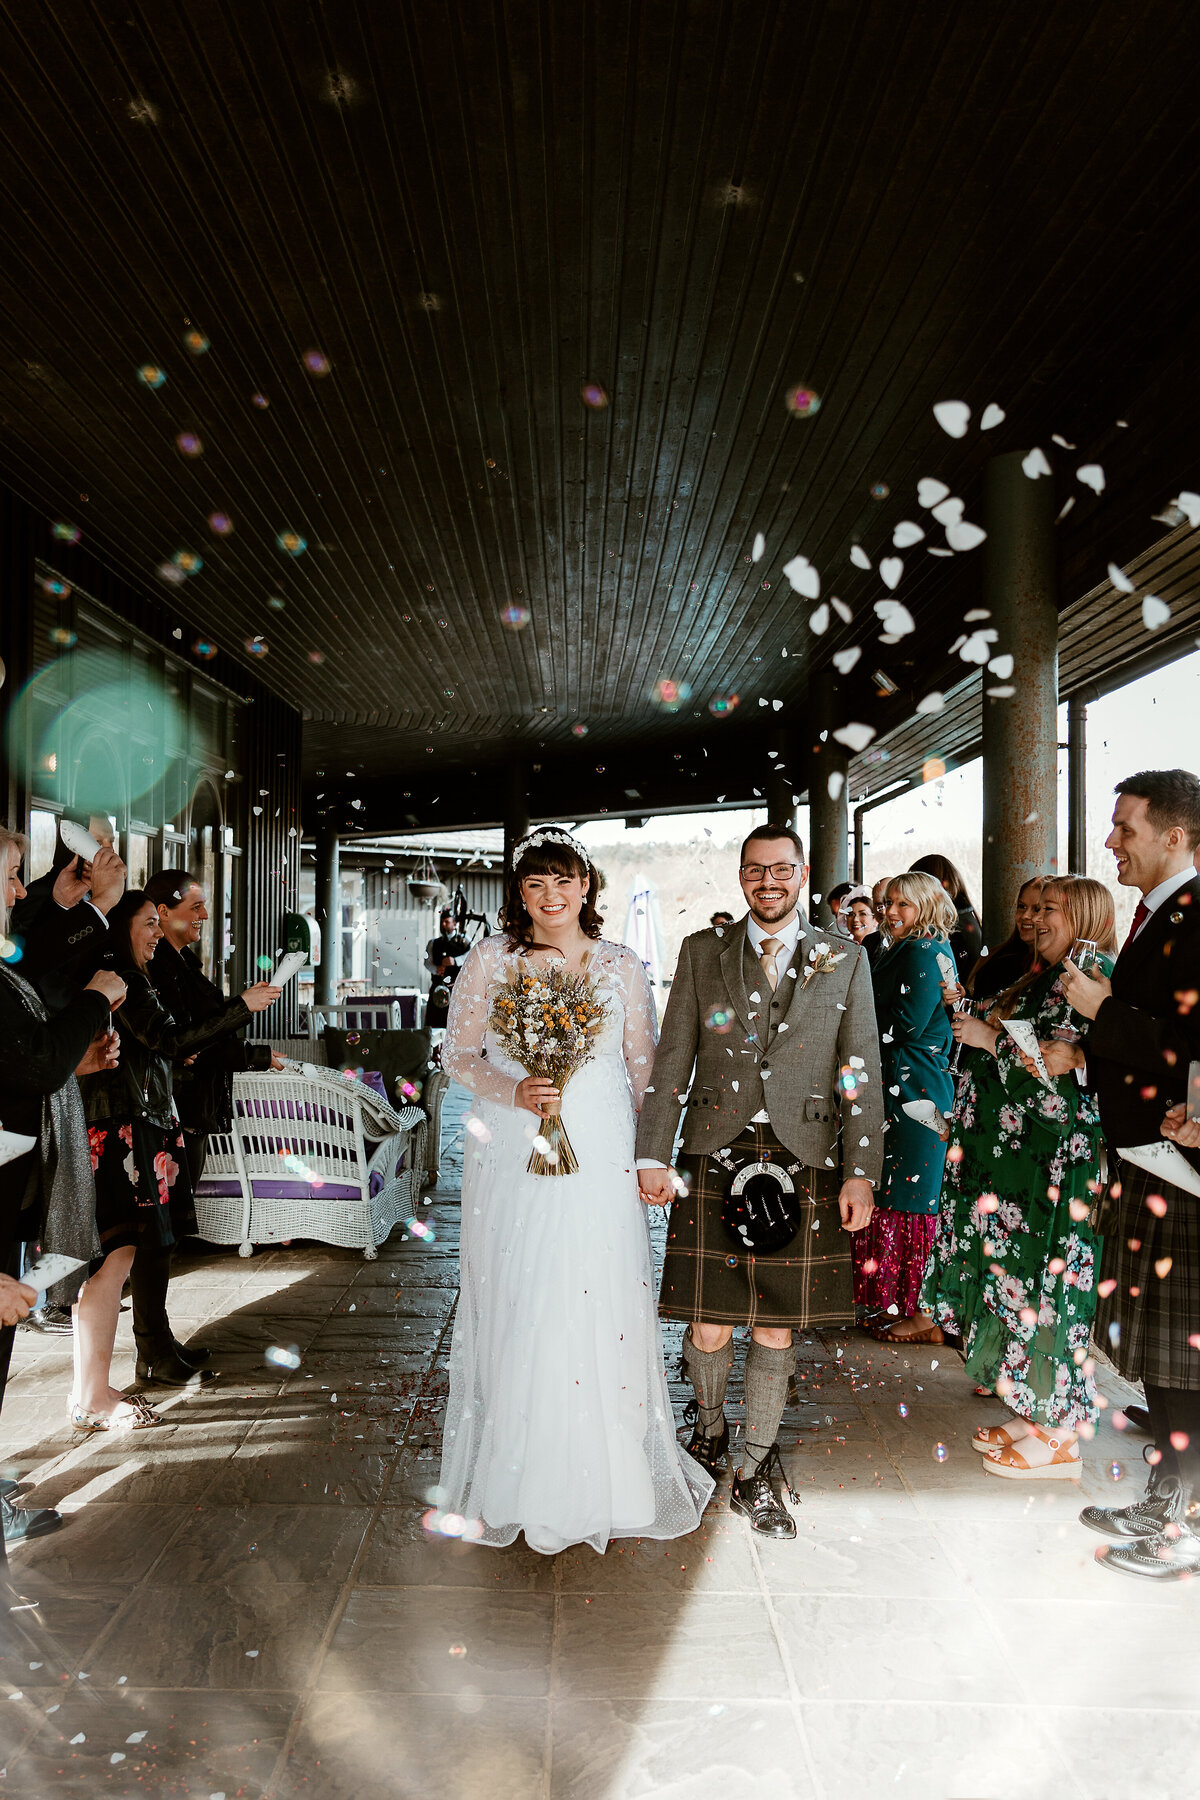 Relaxed and fun wedding  photography in Aberdeen